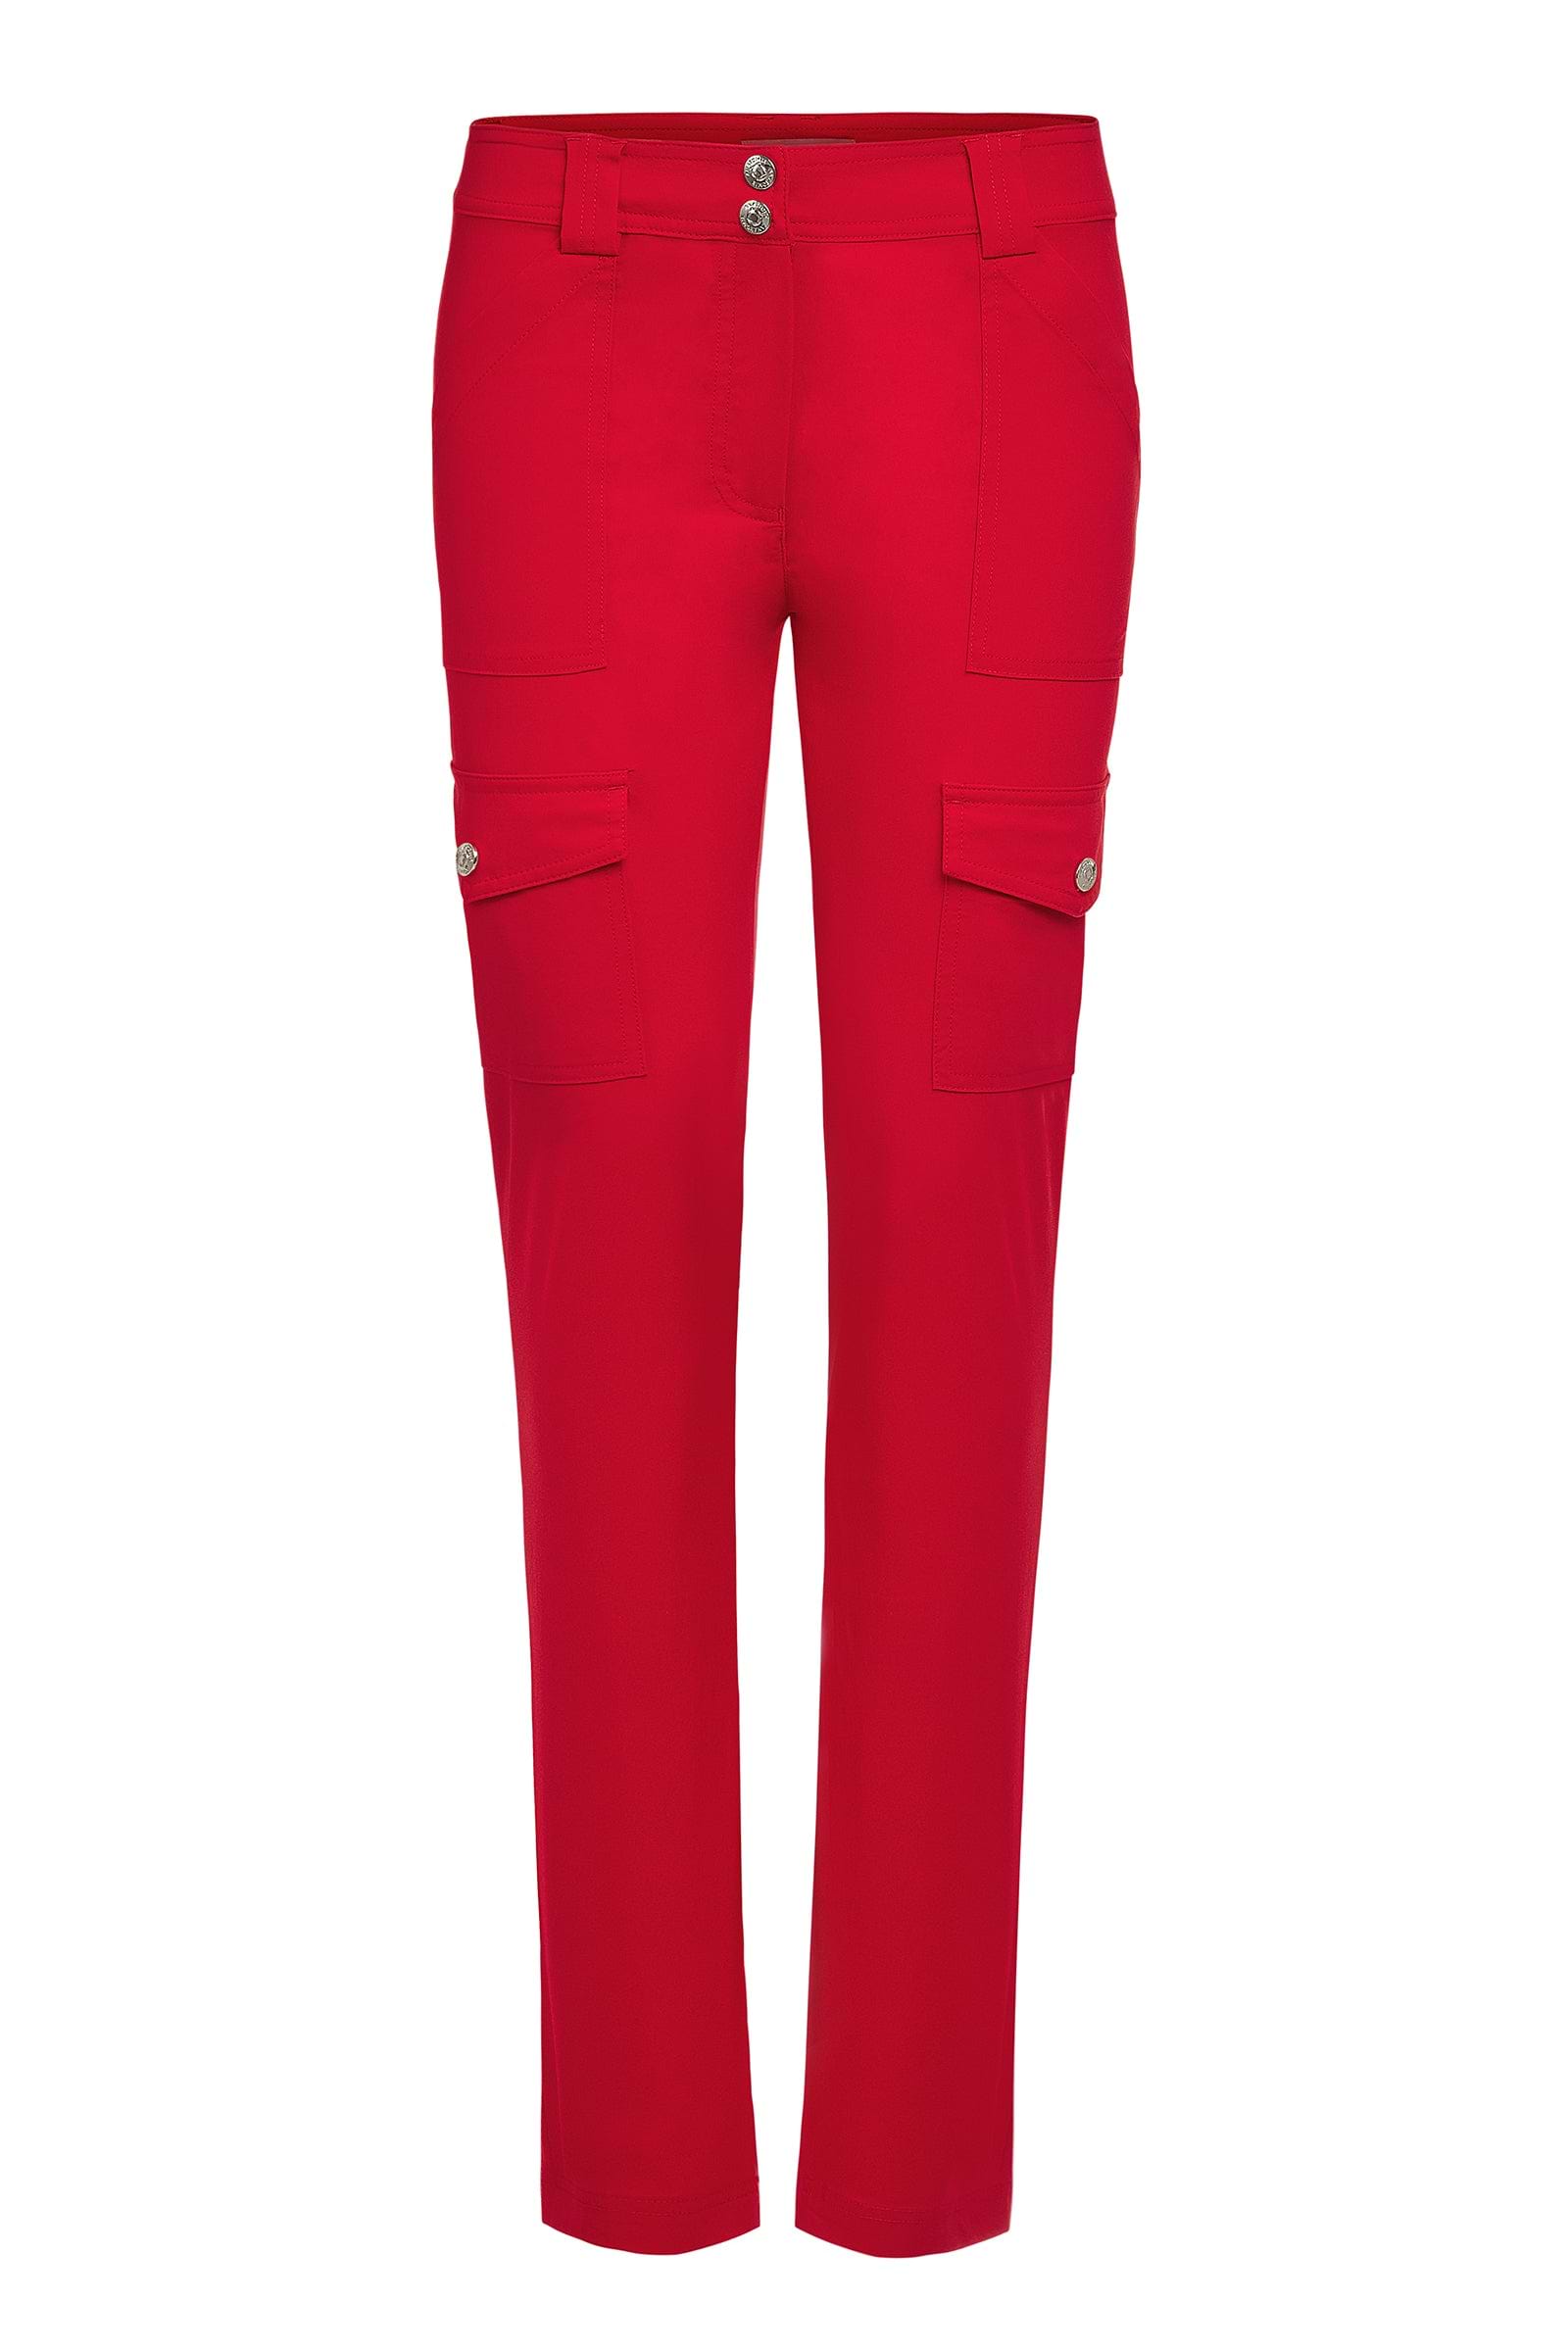 The Best Travel Cargo Pants. Flat Lay of the Kate Skinny Cargo Pant in Atomic Red.